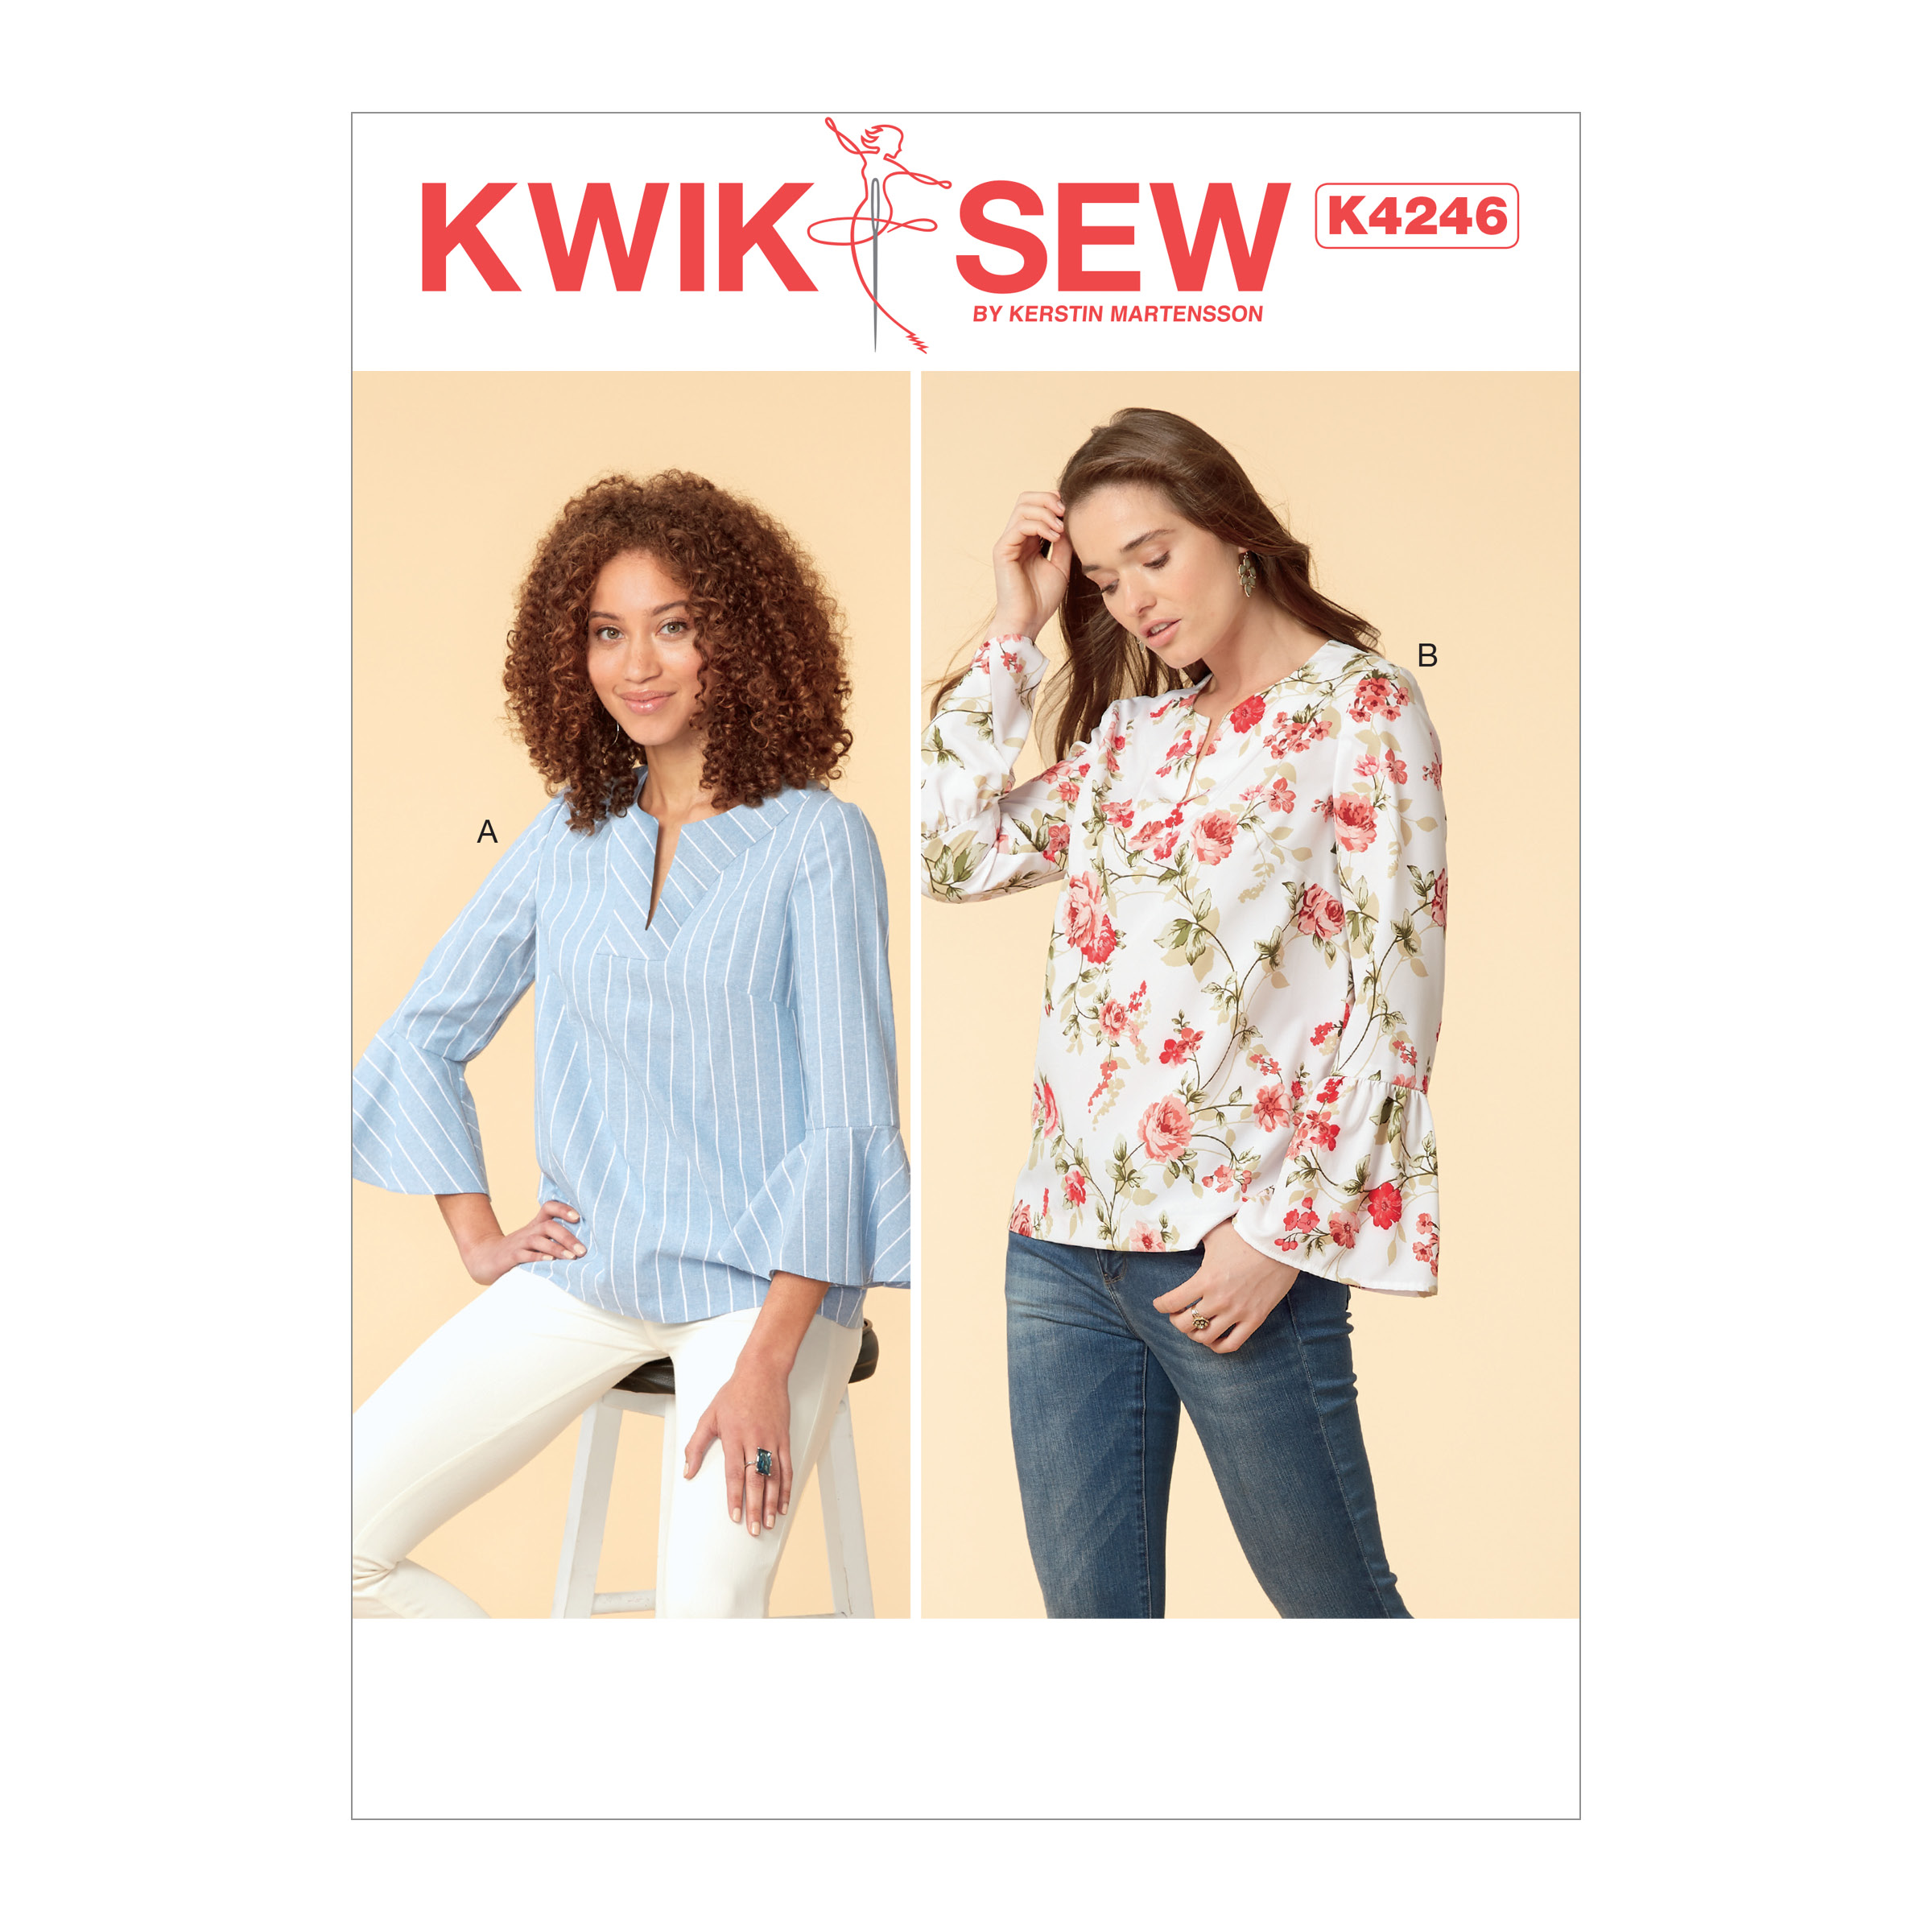 https://images.patternreview.com/sewing/patterns/kwiksew/2018/4246/4246.jpg